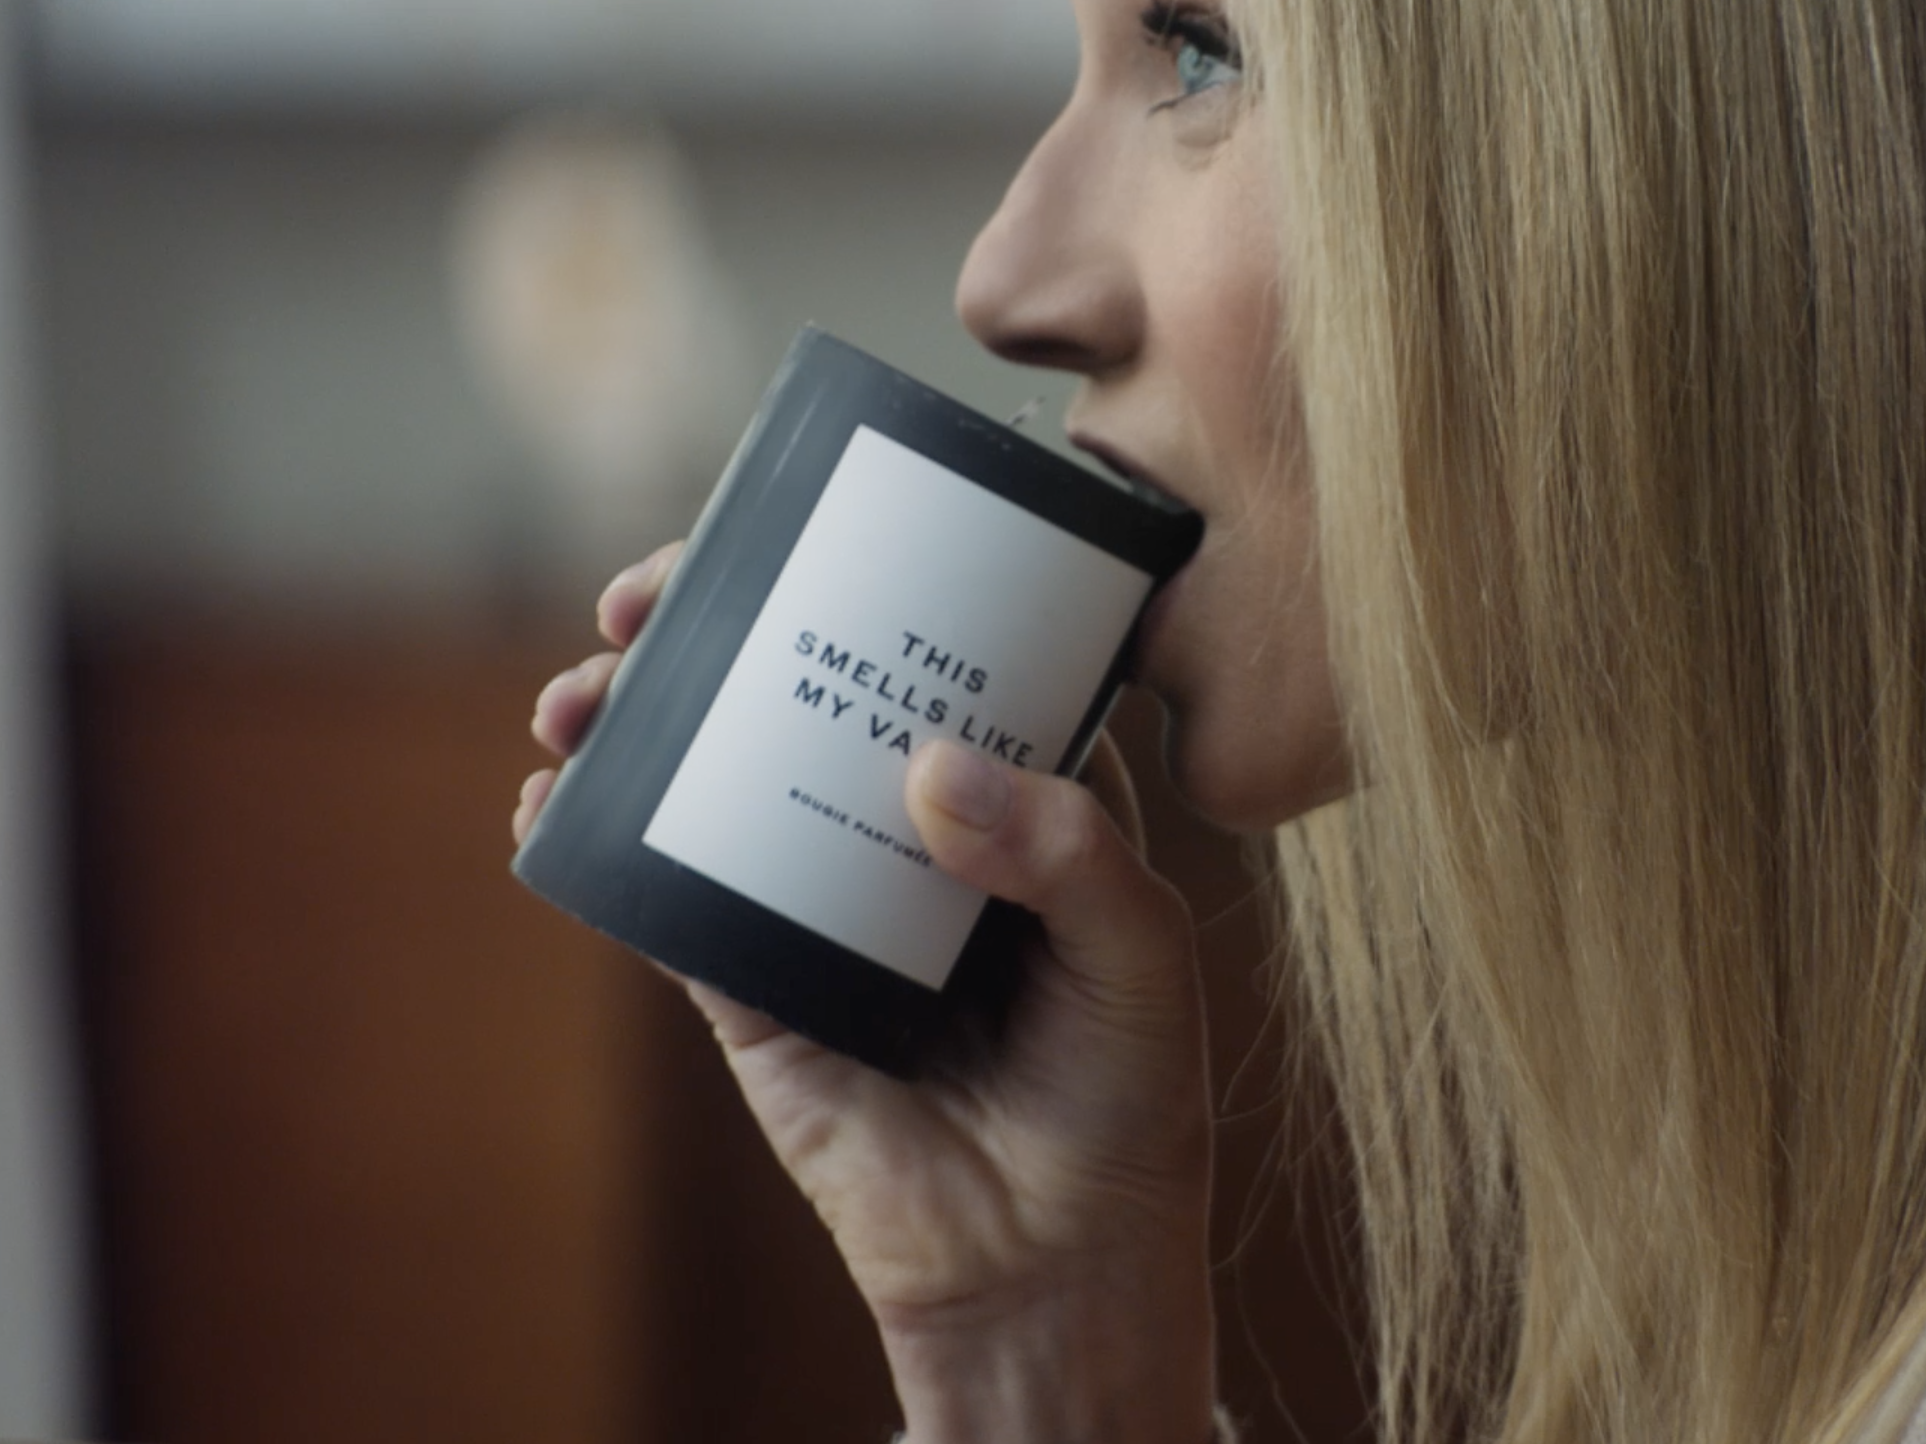 Gwyneth Paltrow attempting to eat a Goop "Smells Like My Vagina" candle